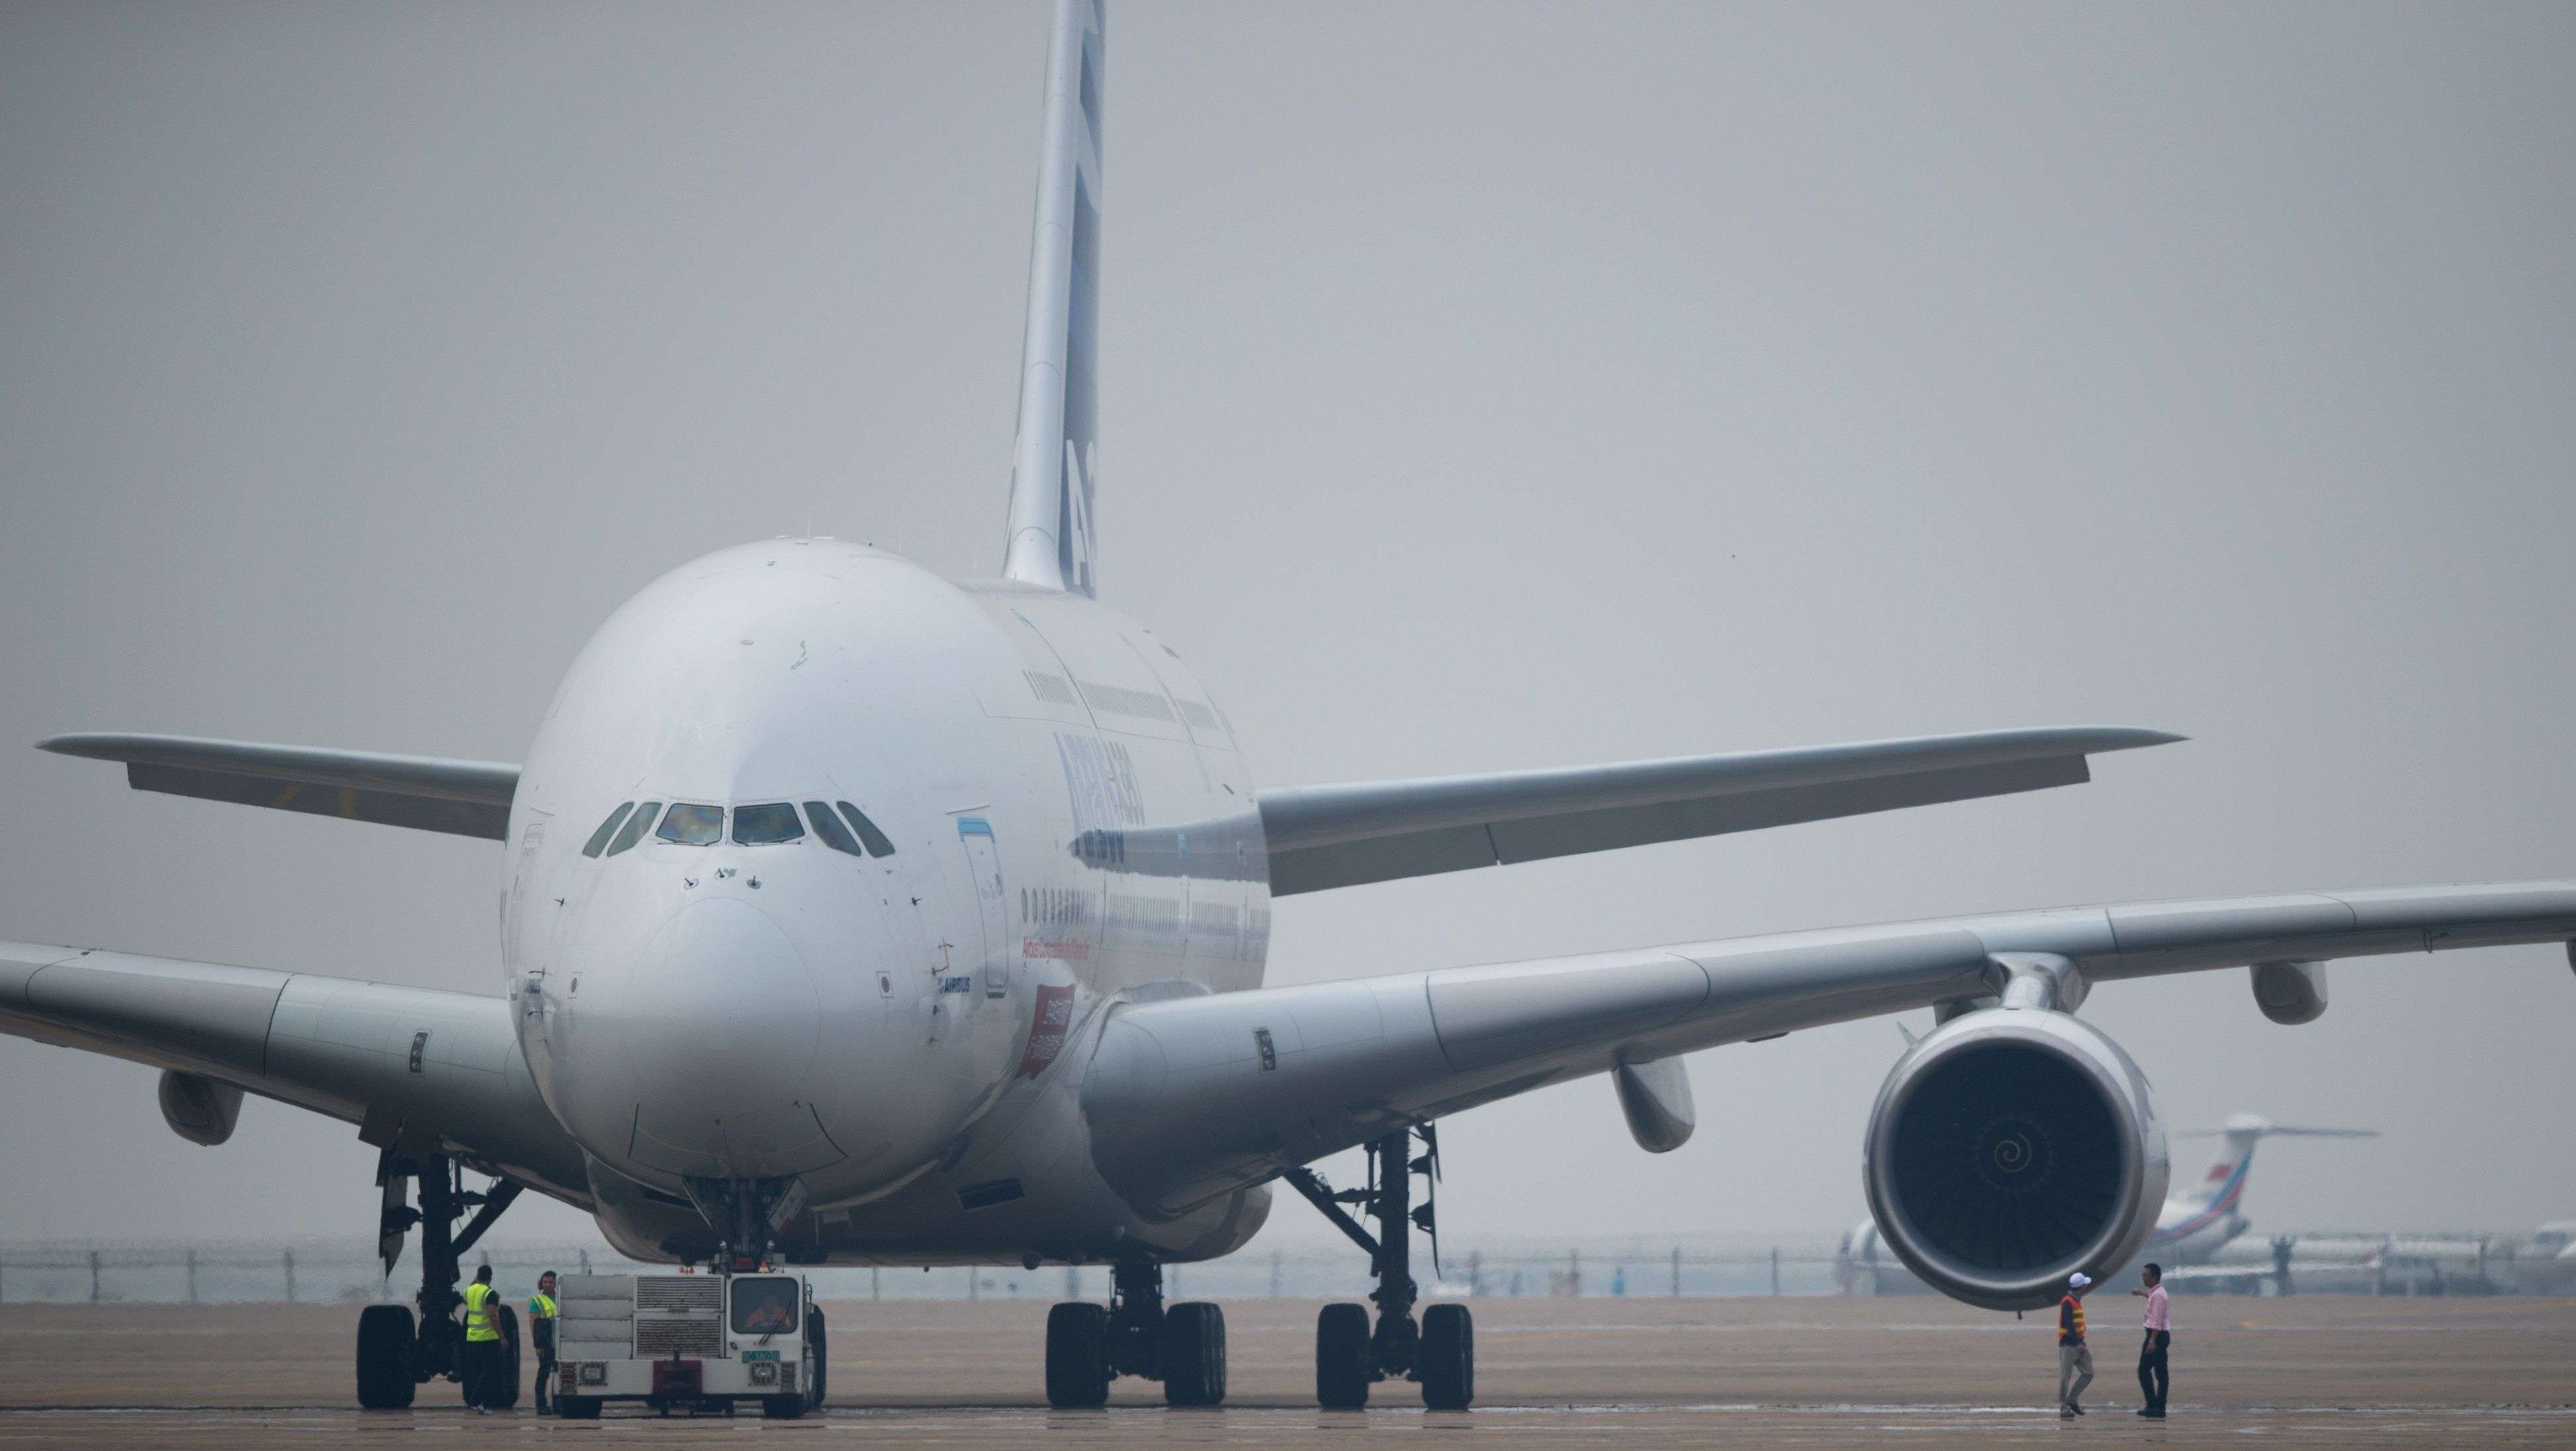 An Airbus A380 plane on the tarmac before taking off at the Zhuhai Airshow in 2014. Photo: AFP